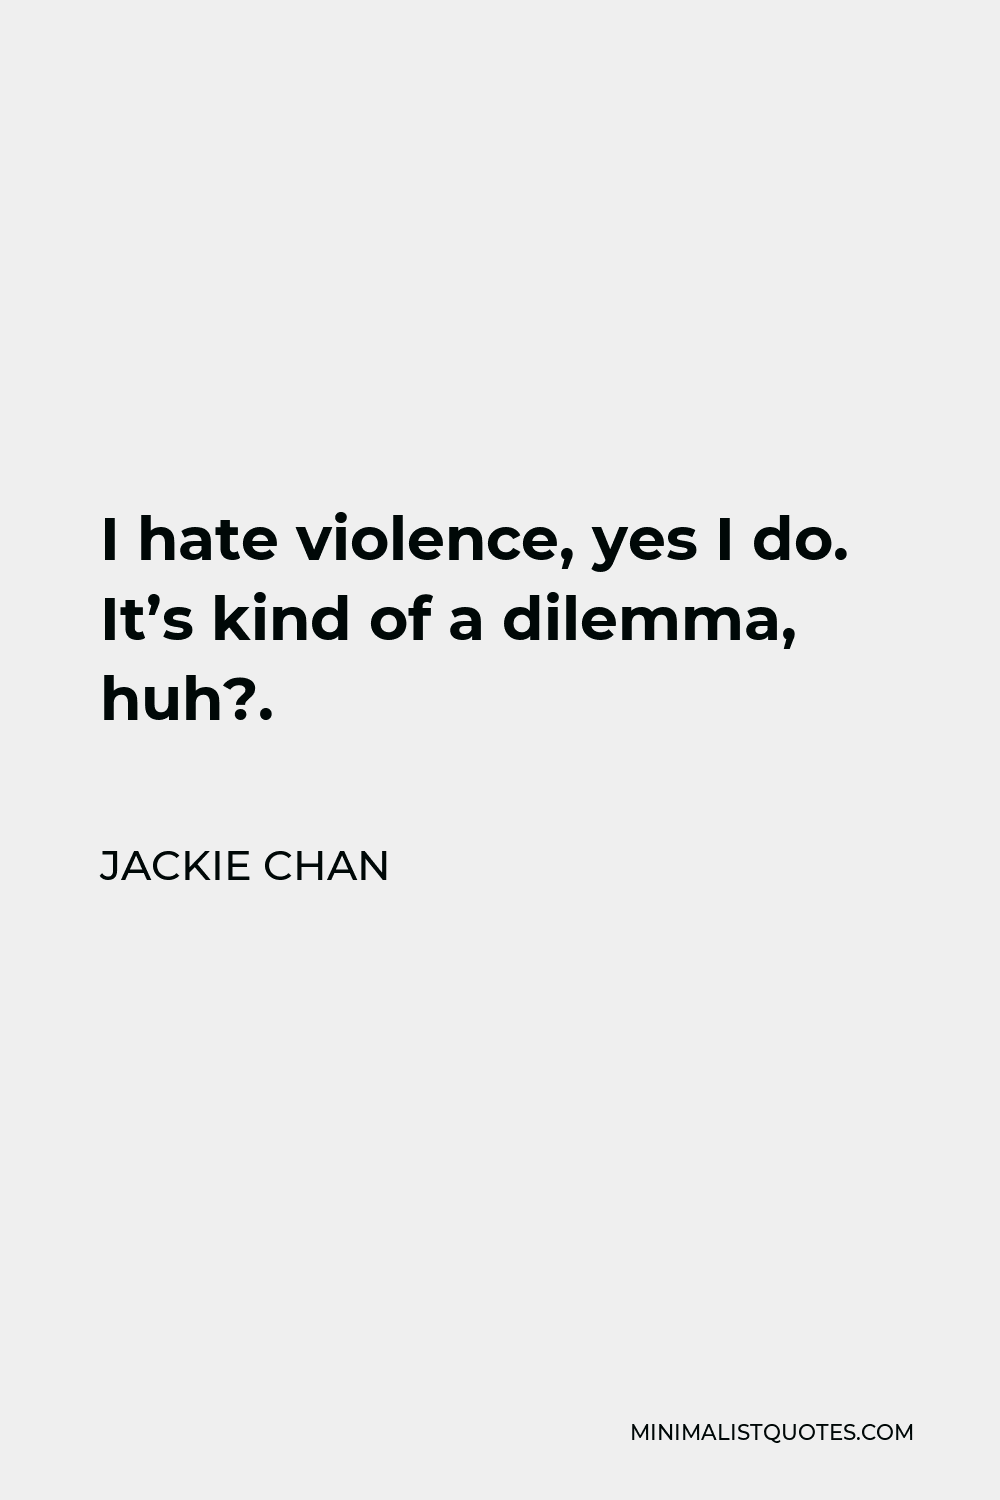 Jackie Chan Quote - I hate violence, yes I do. It’s kind of a dilemma, huh?.